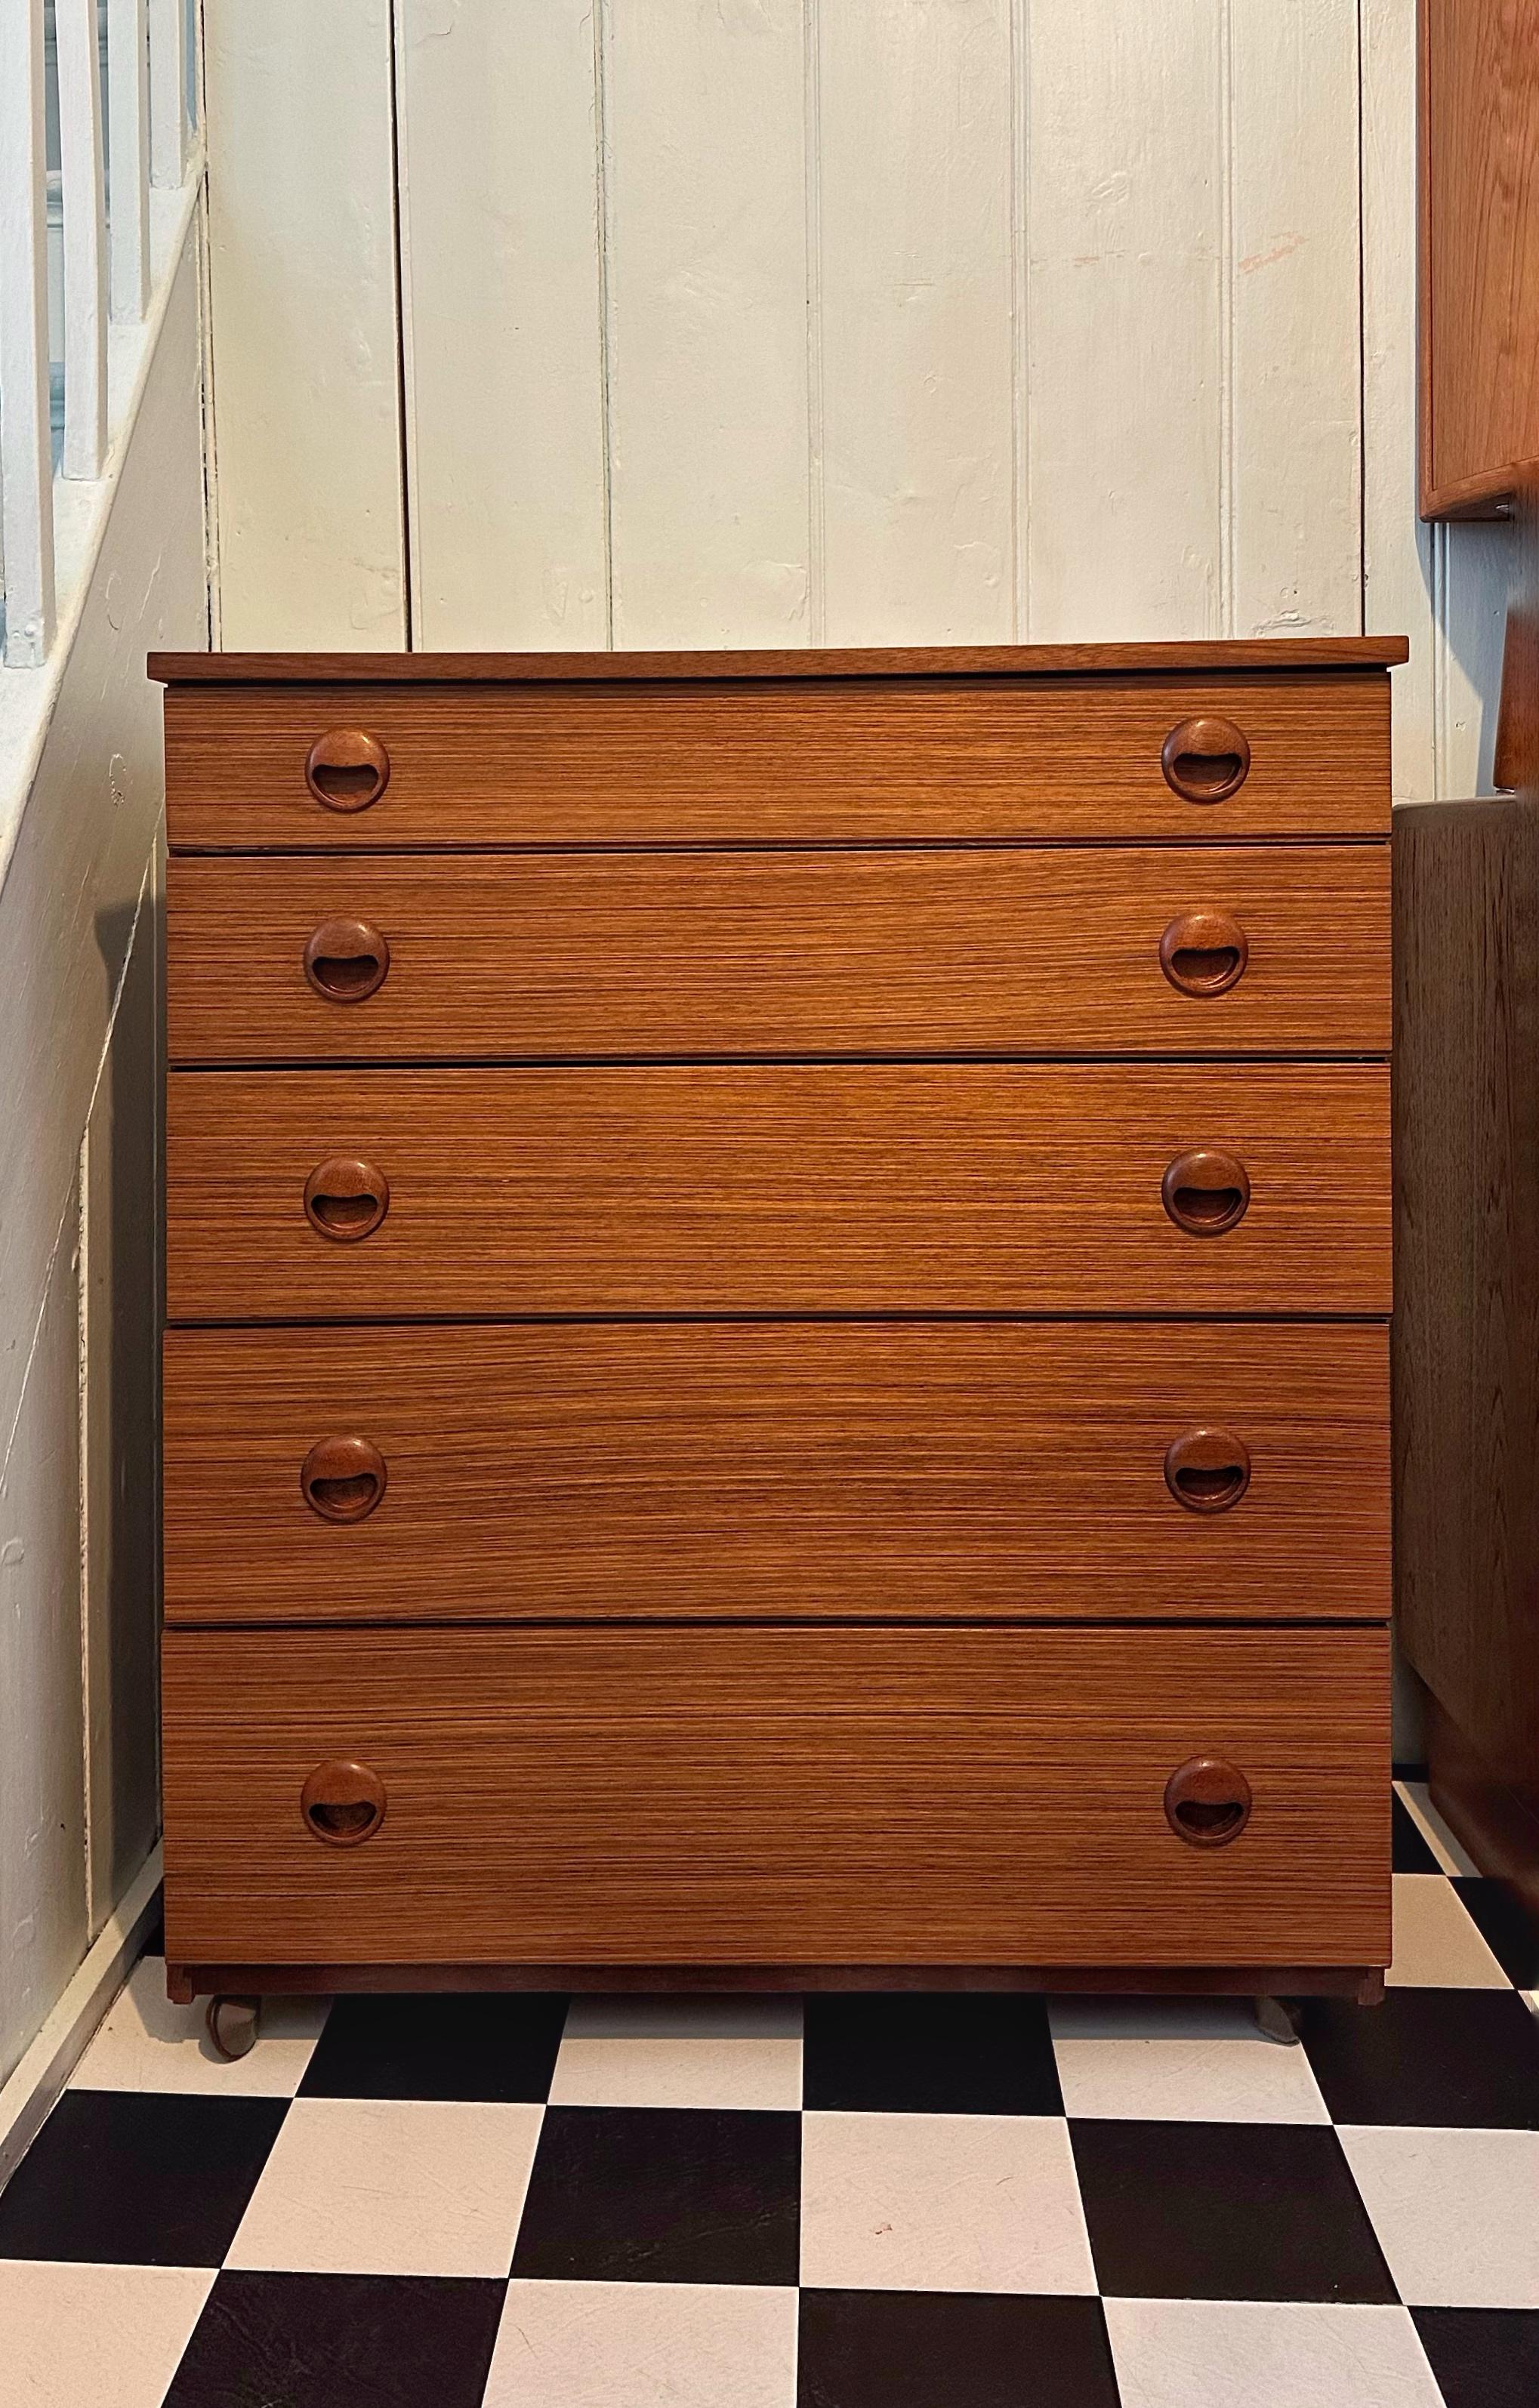 We’re happy to provide our own competitive shipping quotes with trusted couriers. Please message us with your postcode for a more accurate price. Thank you.

Beautiful Mid Century teak chest of drawers by Schreiber. It offers plenty of storage with